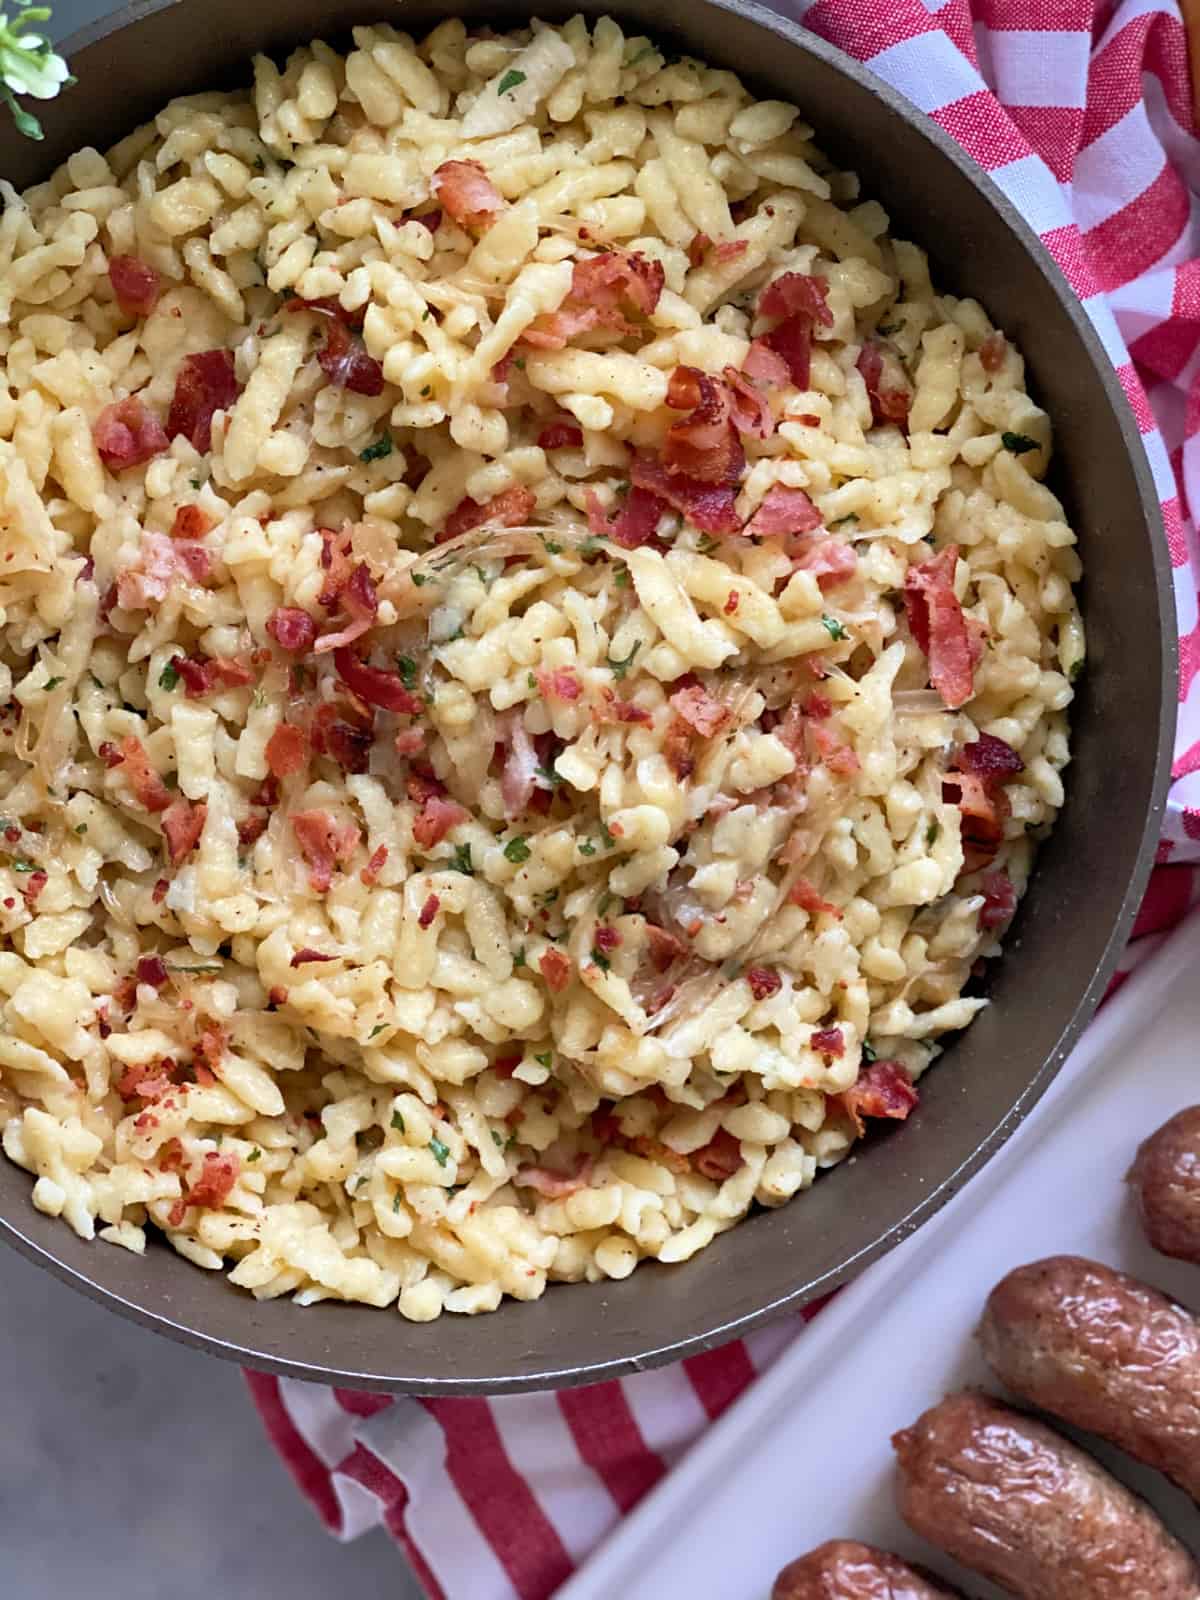 Top view of skillet filled with bacon spaetzle with a red and white striped cloth on the side and brats on the side.